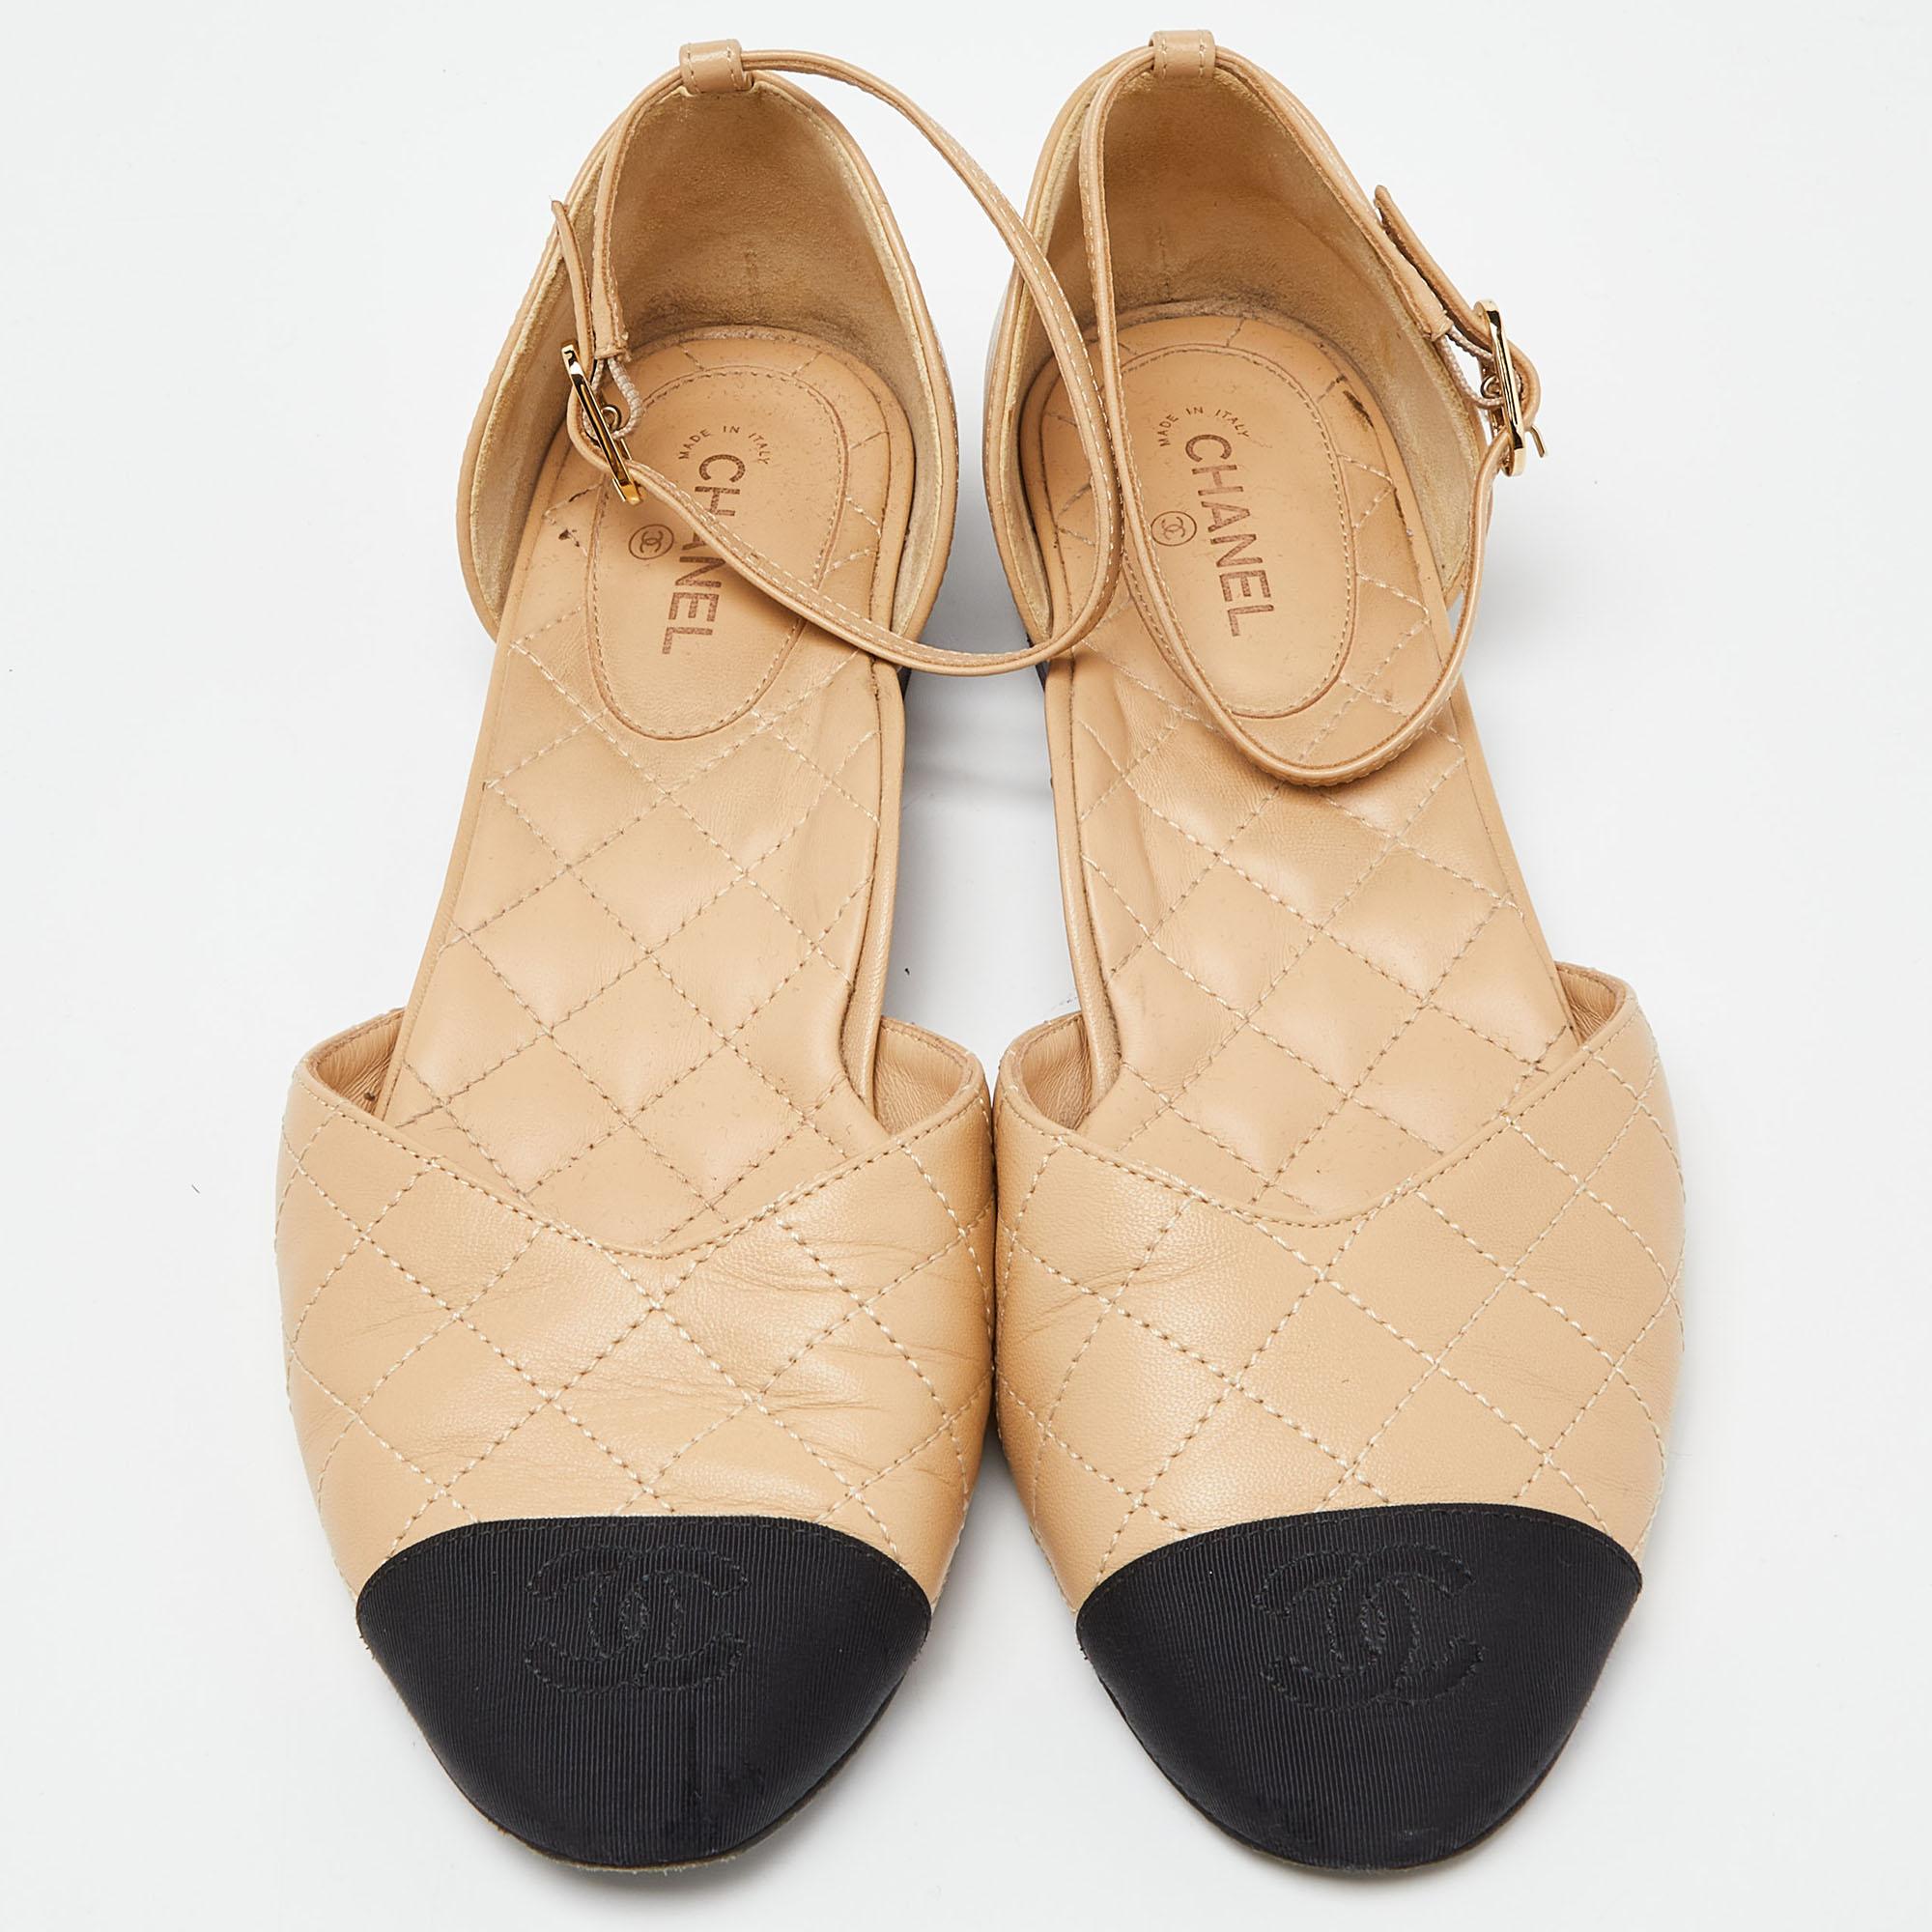 These well-crafted Chanel ankle strap flats have got you covered for all-day plans. They come in a versatile design, and they look great on the feet.

Includes: Original Dustbag

